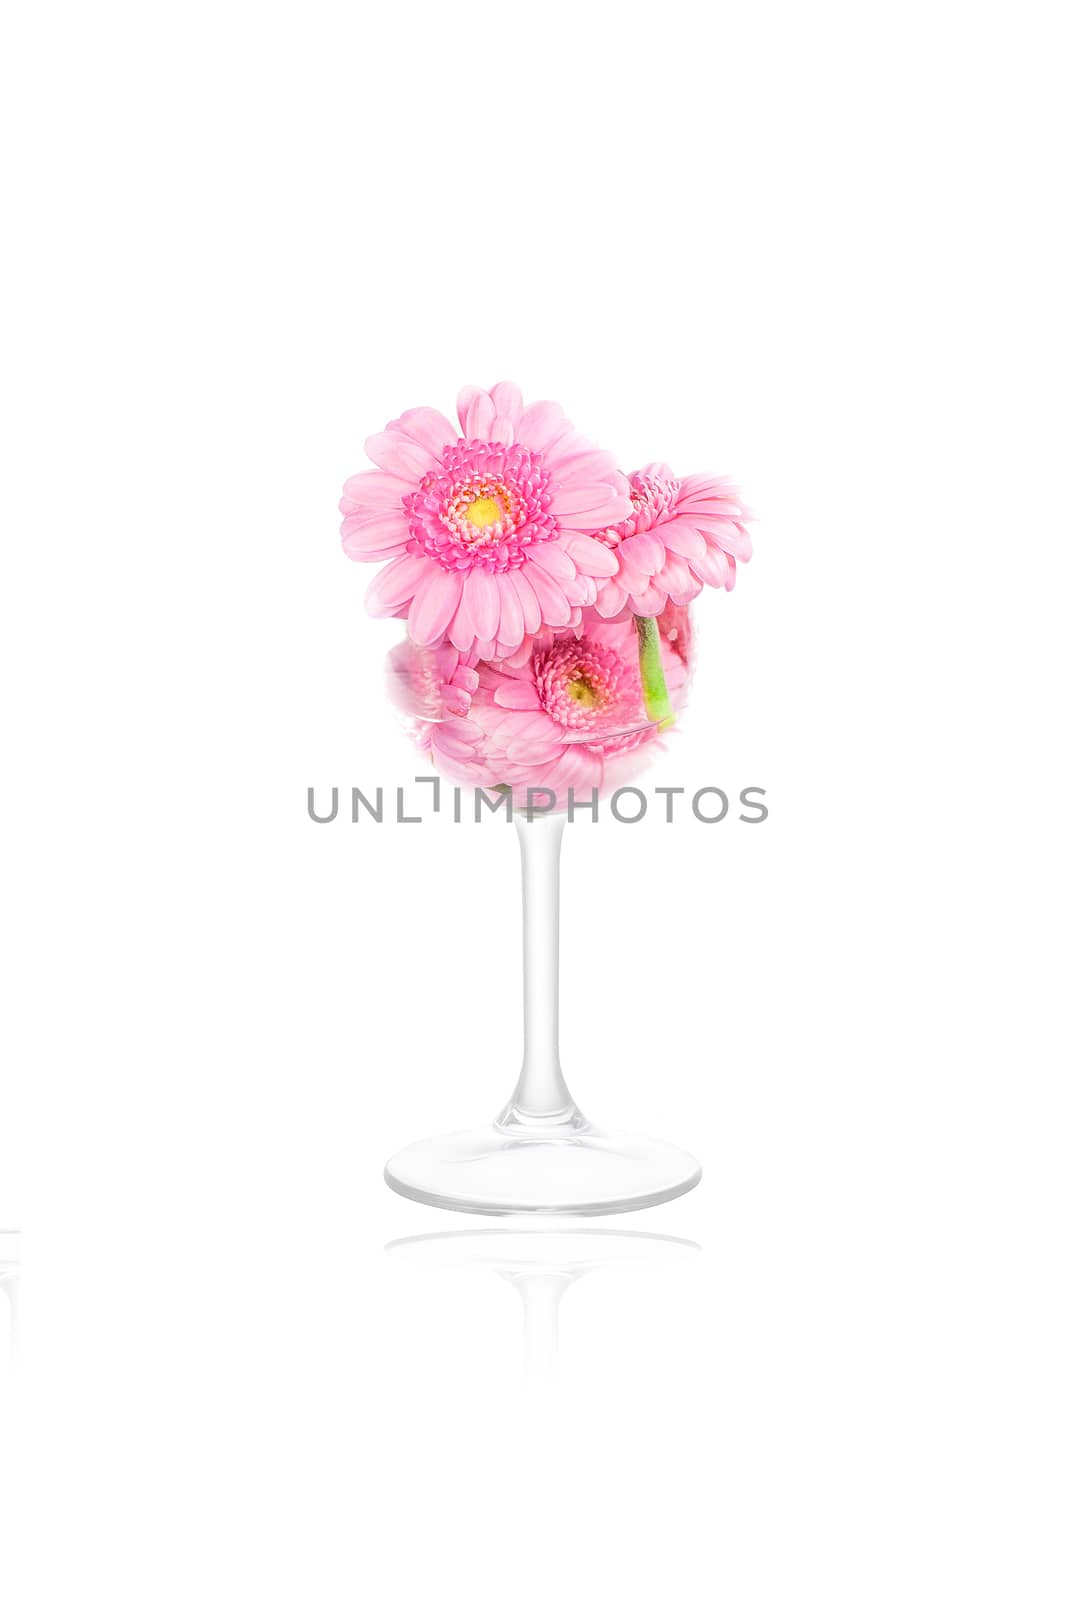 Flowers in a glass by Sportactive